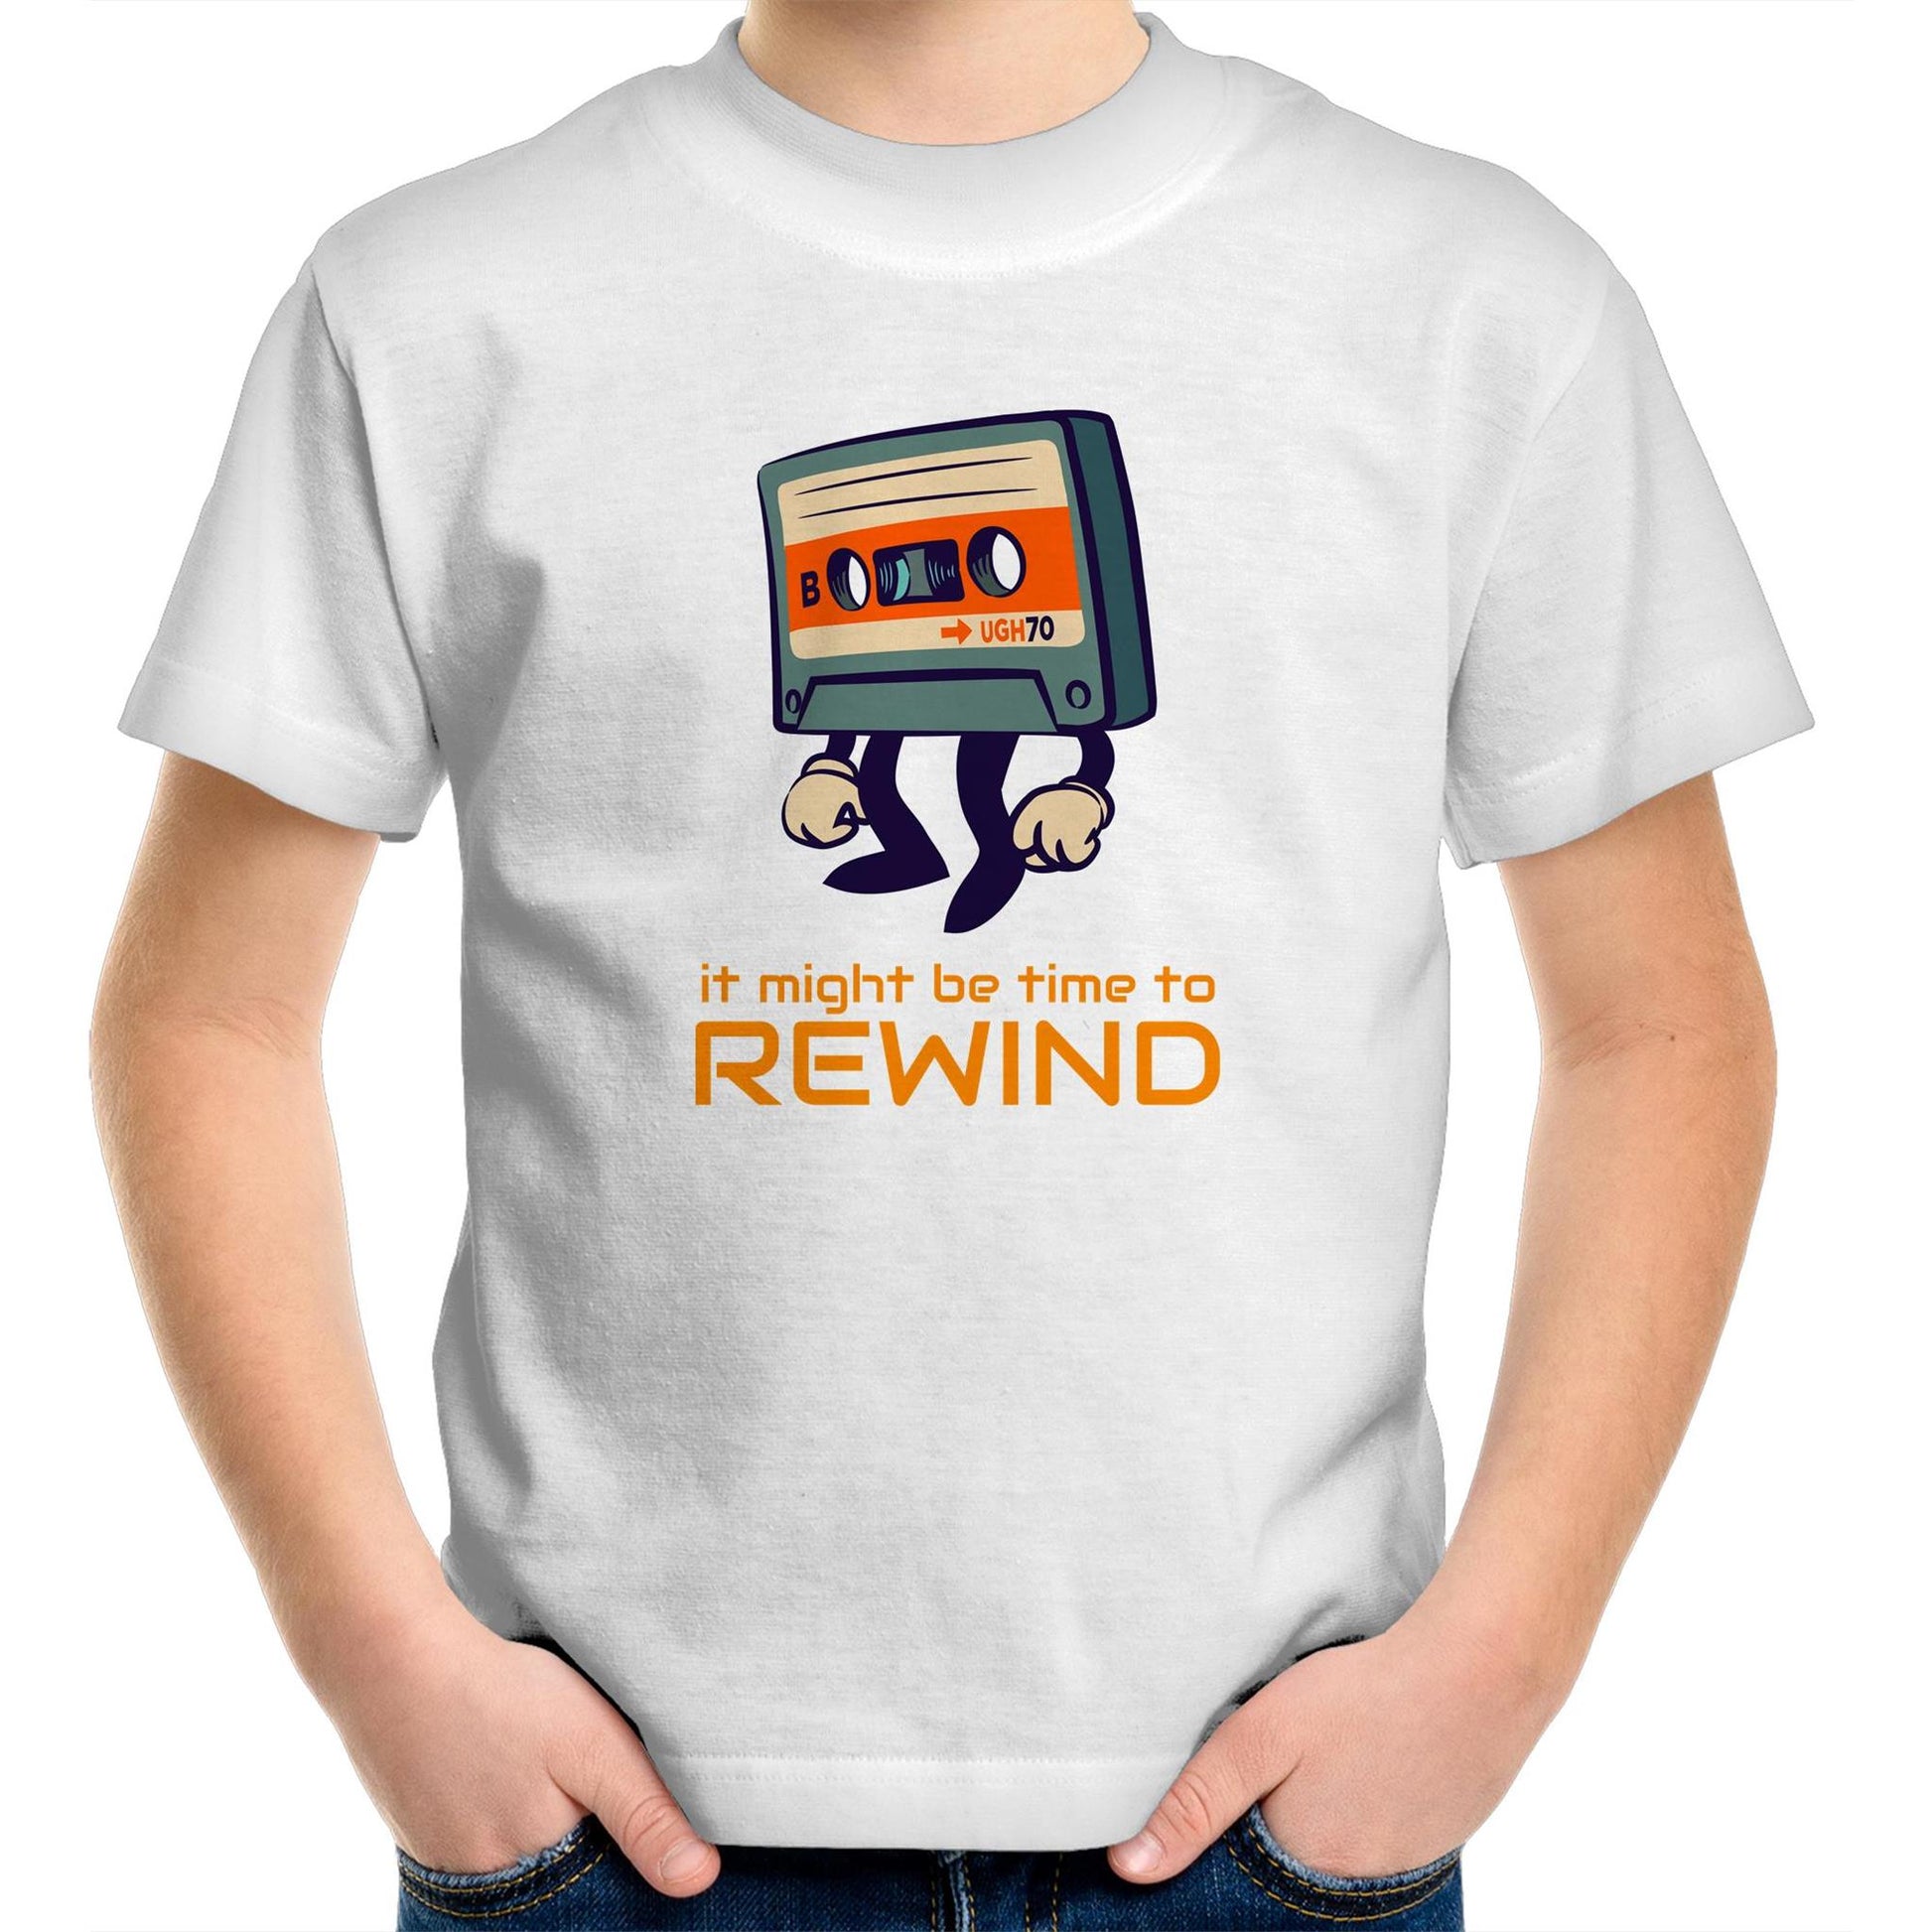 It Might Be Time To Rewind - Kids Youth Crew T-Shirt White Kids Youth T-shirt Music Retro